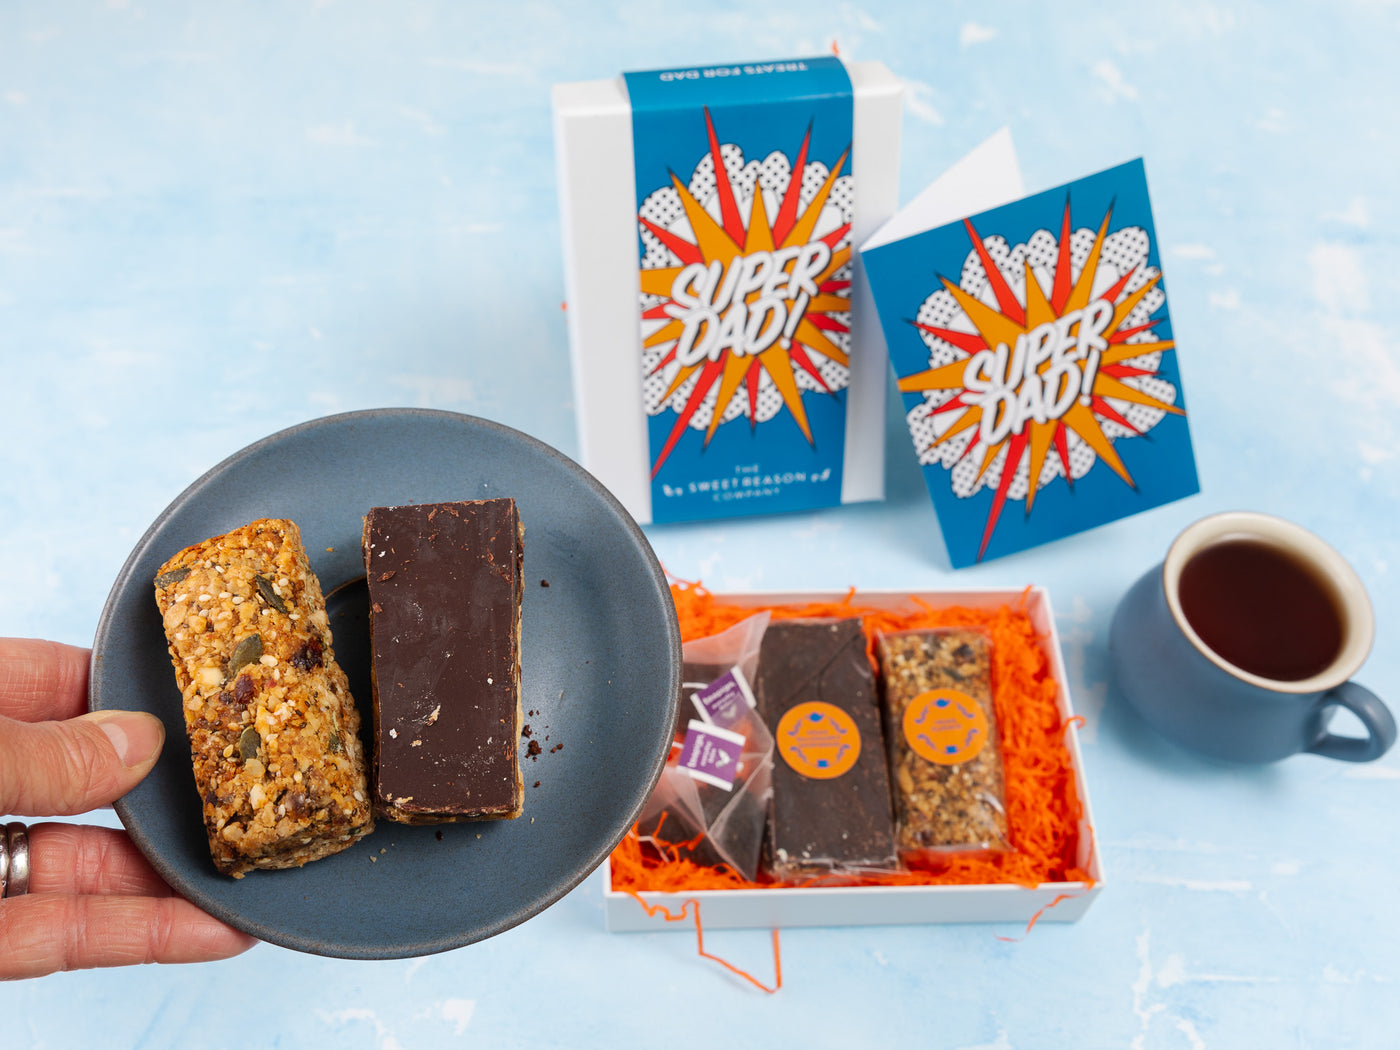 'Super Dad' Vegan Bars Afternoon Tea for Two Gift Box